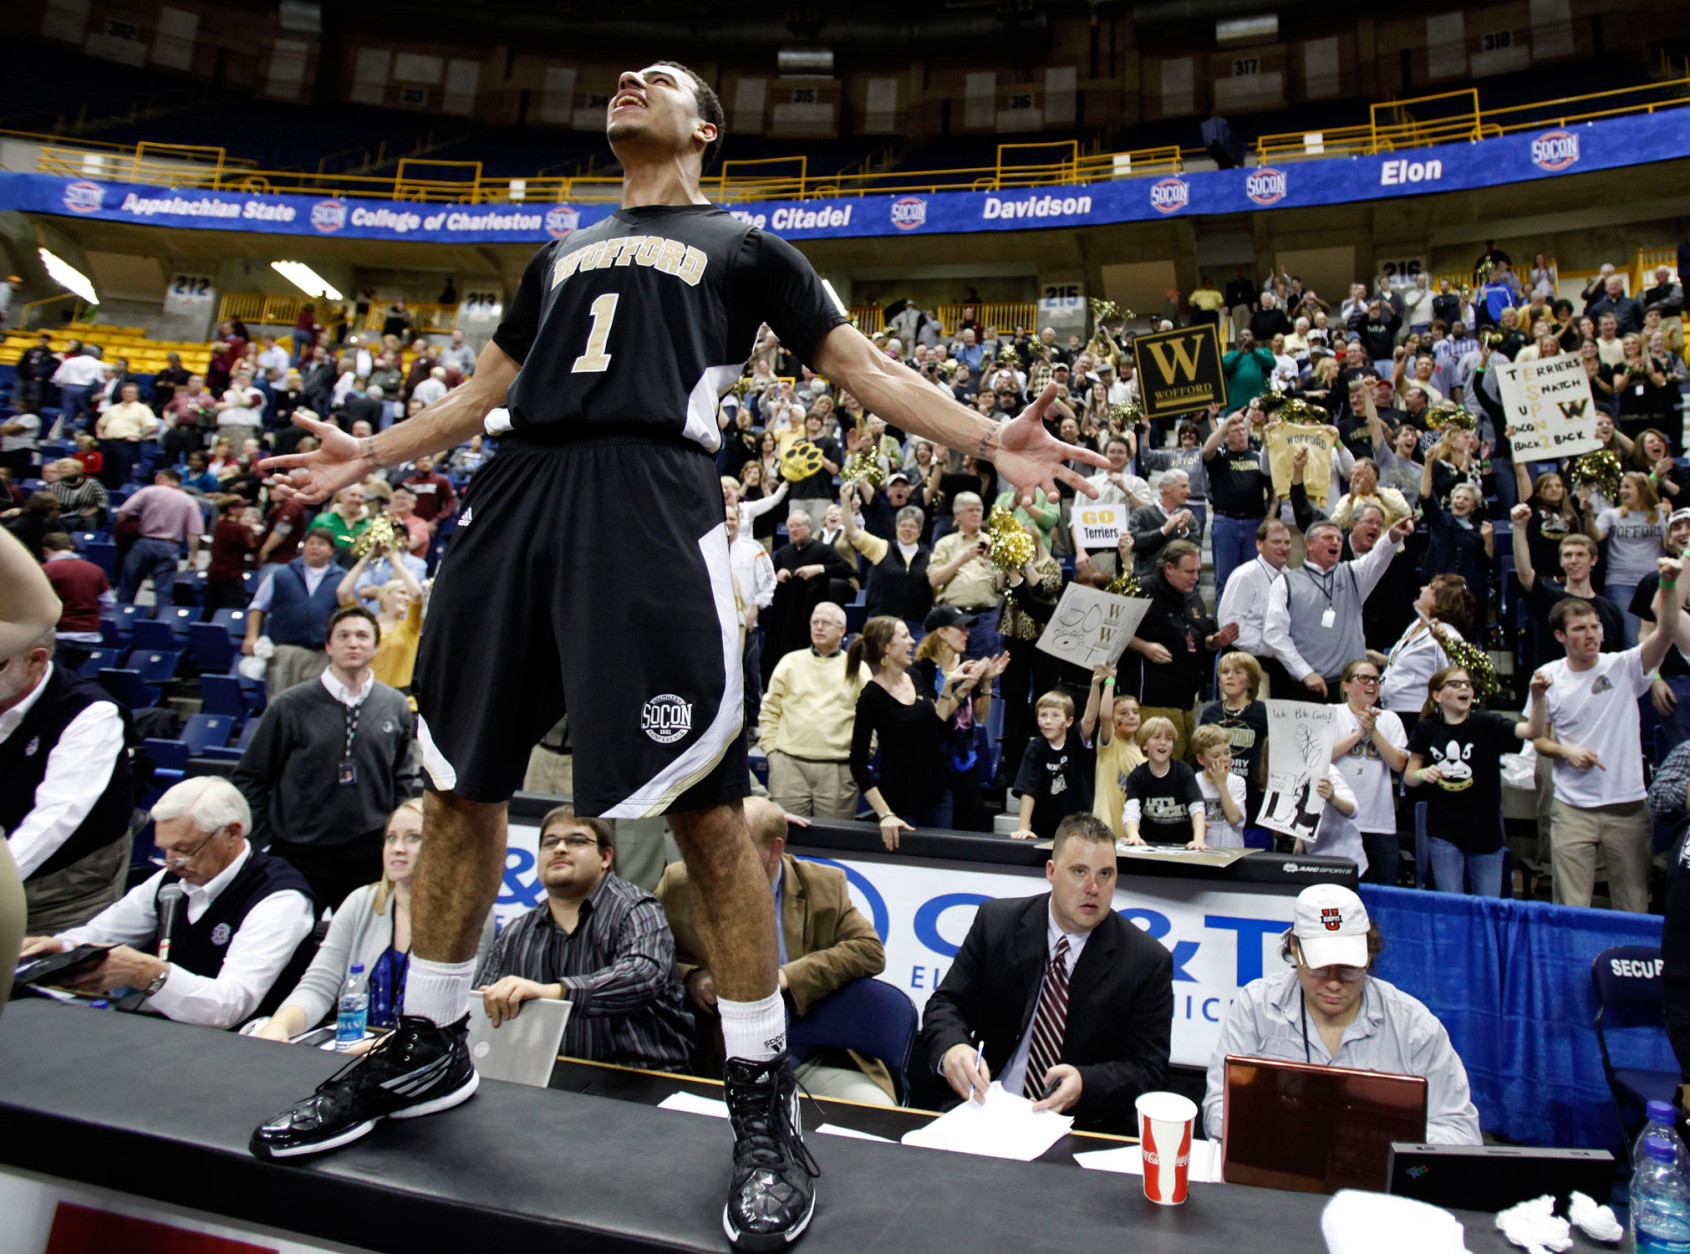 Wofford guard Cameron Rundles lets out a yell after Wofford defeated College of Charleston 77-67 in an NCAA college basketball game to win the Southern Conference tournament Monday, March 7, 2011, in Chattanooga, Tenn. Rundles led Wofford with 21 points. (AP Photo/Mark Humphrey)